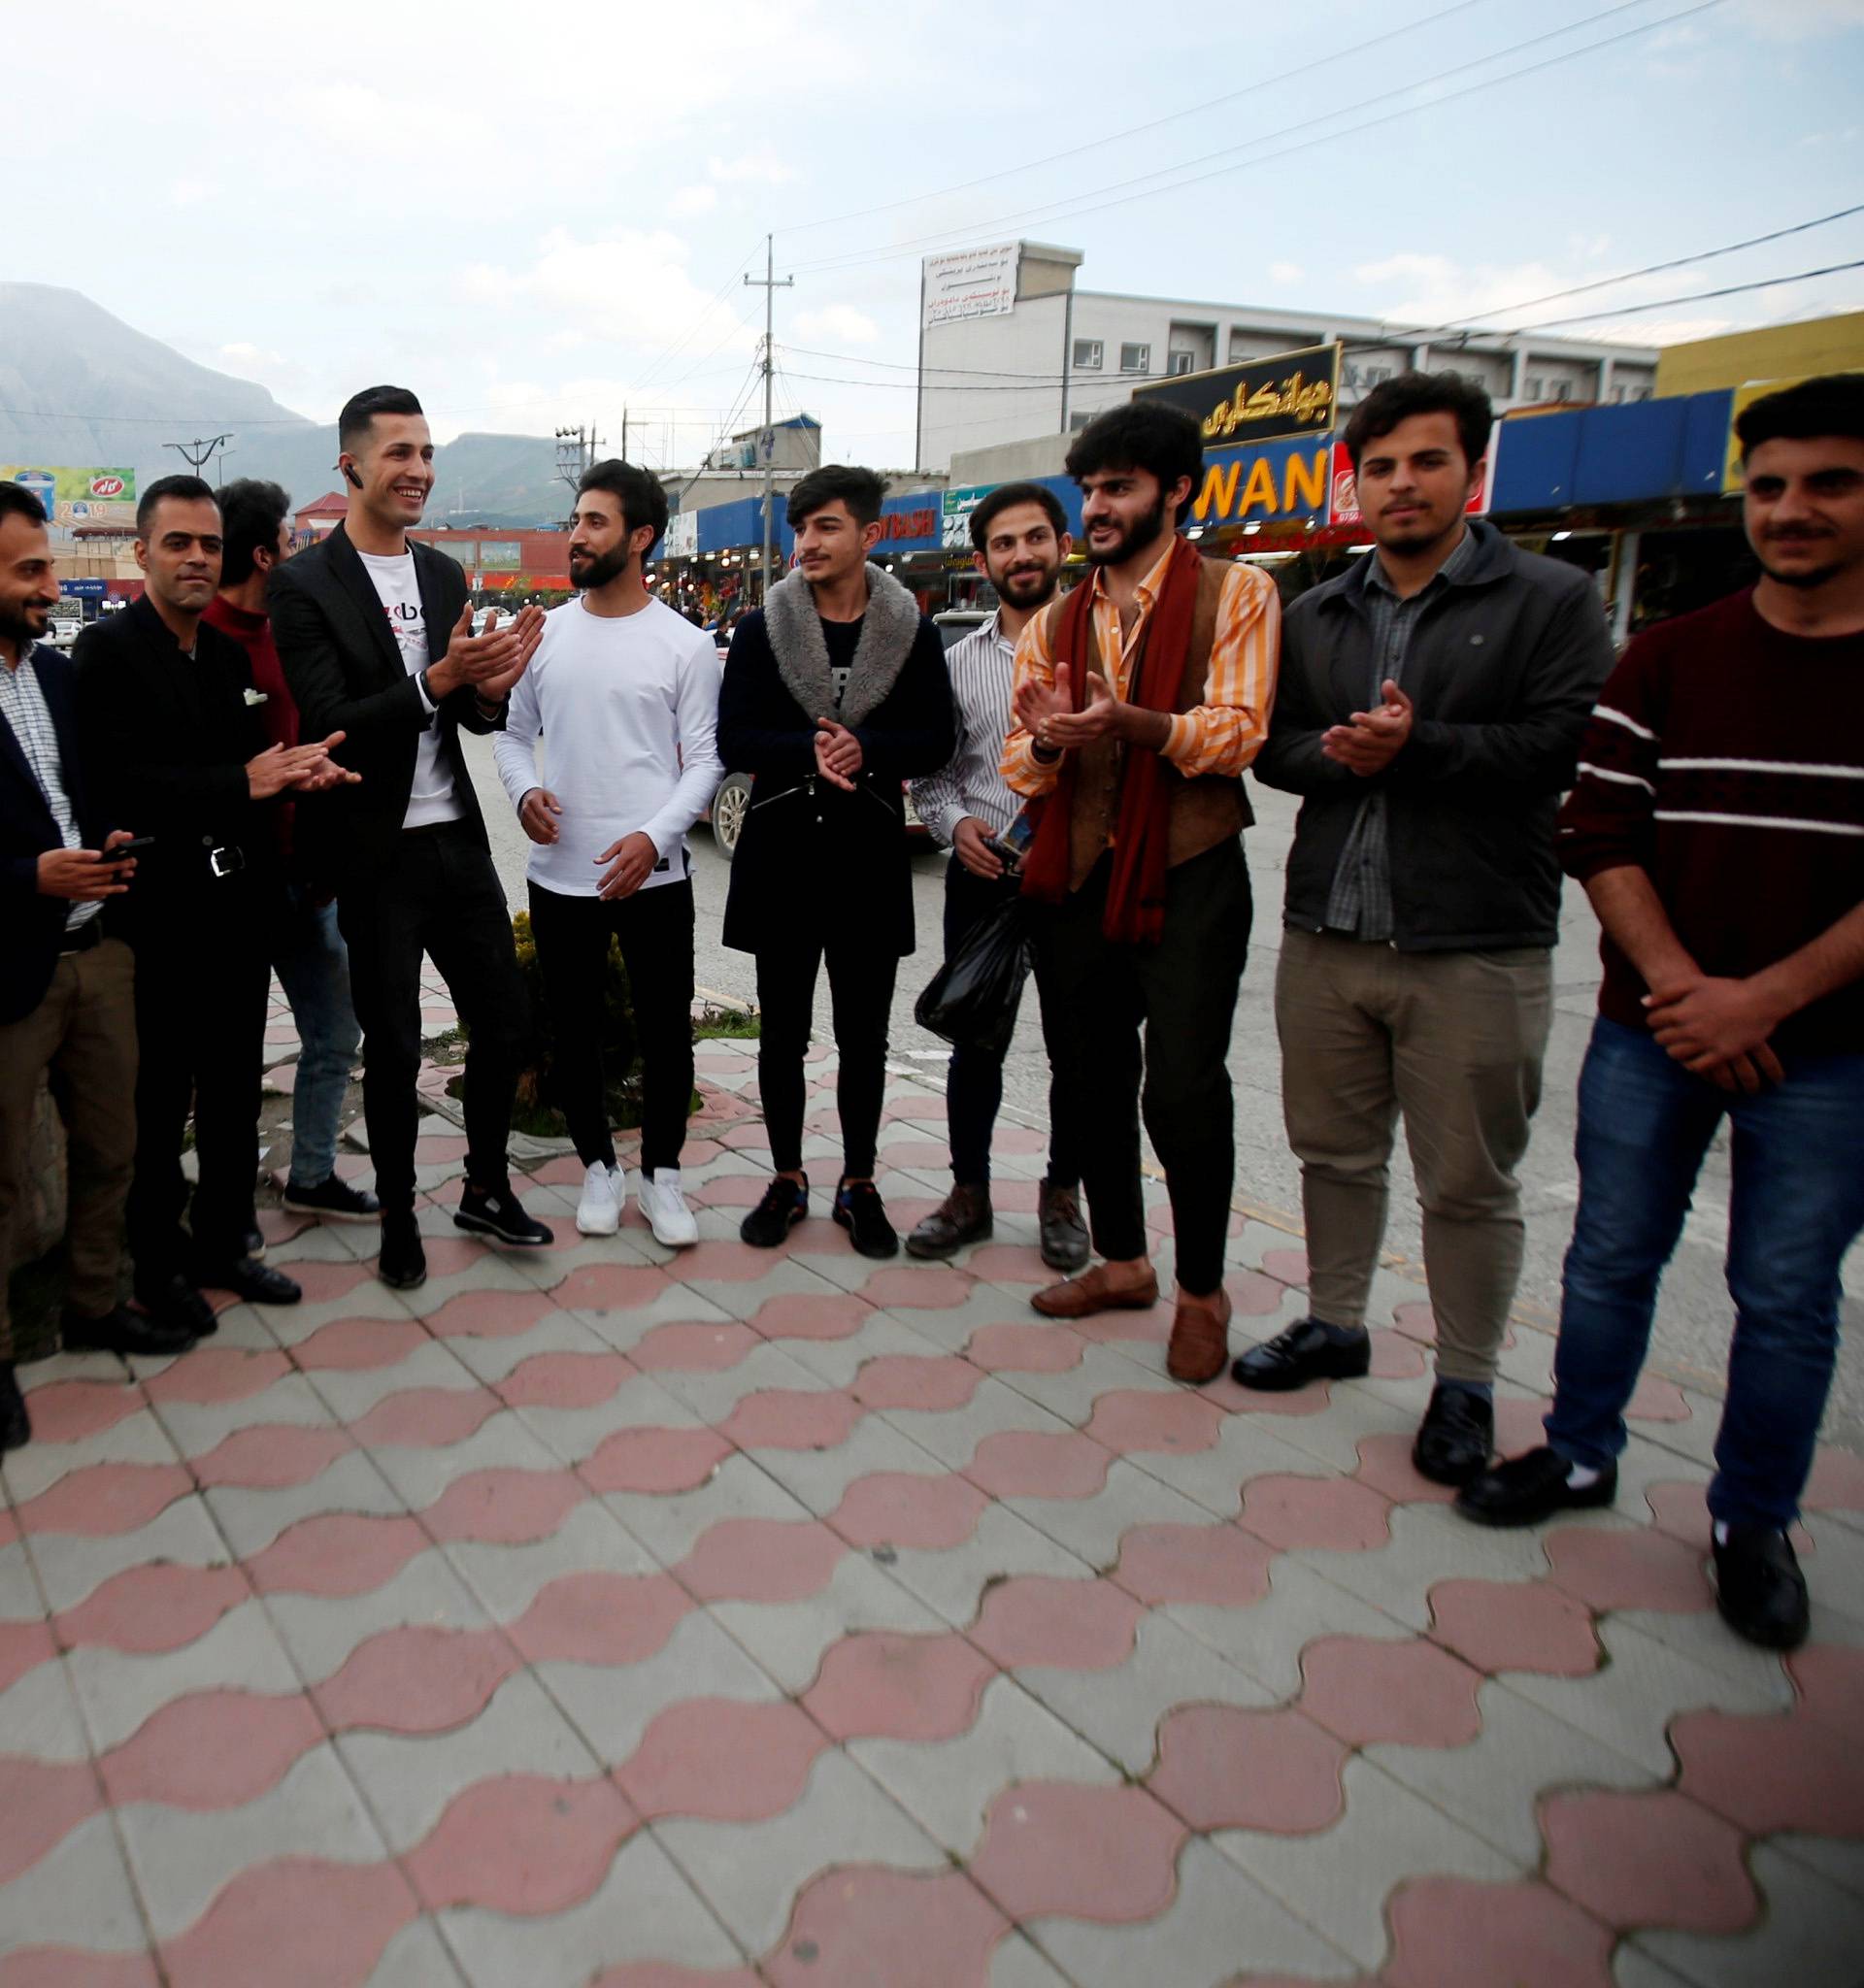 Biwar Abdullah, 25, an Iraqi Kurdish local footballer, who looks like the football player Cristiano Ronaldo, takes pictures with people in the district of Soran, northeast of Erbil